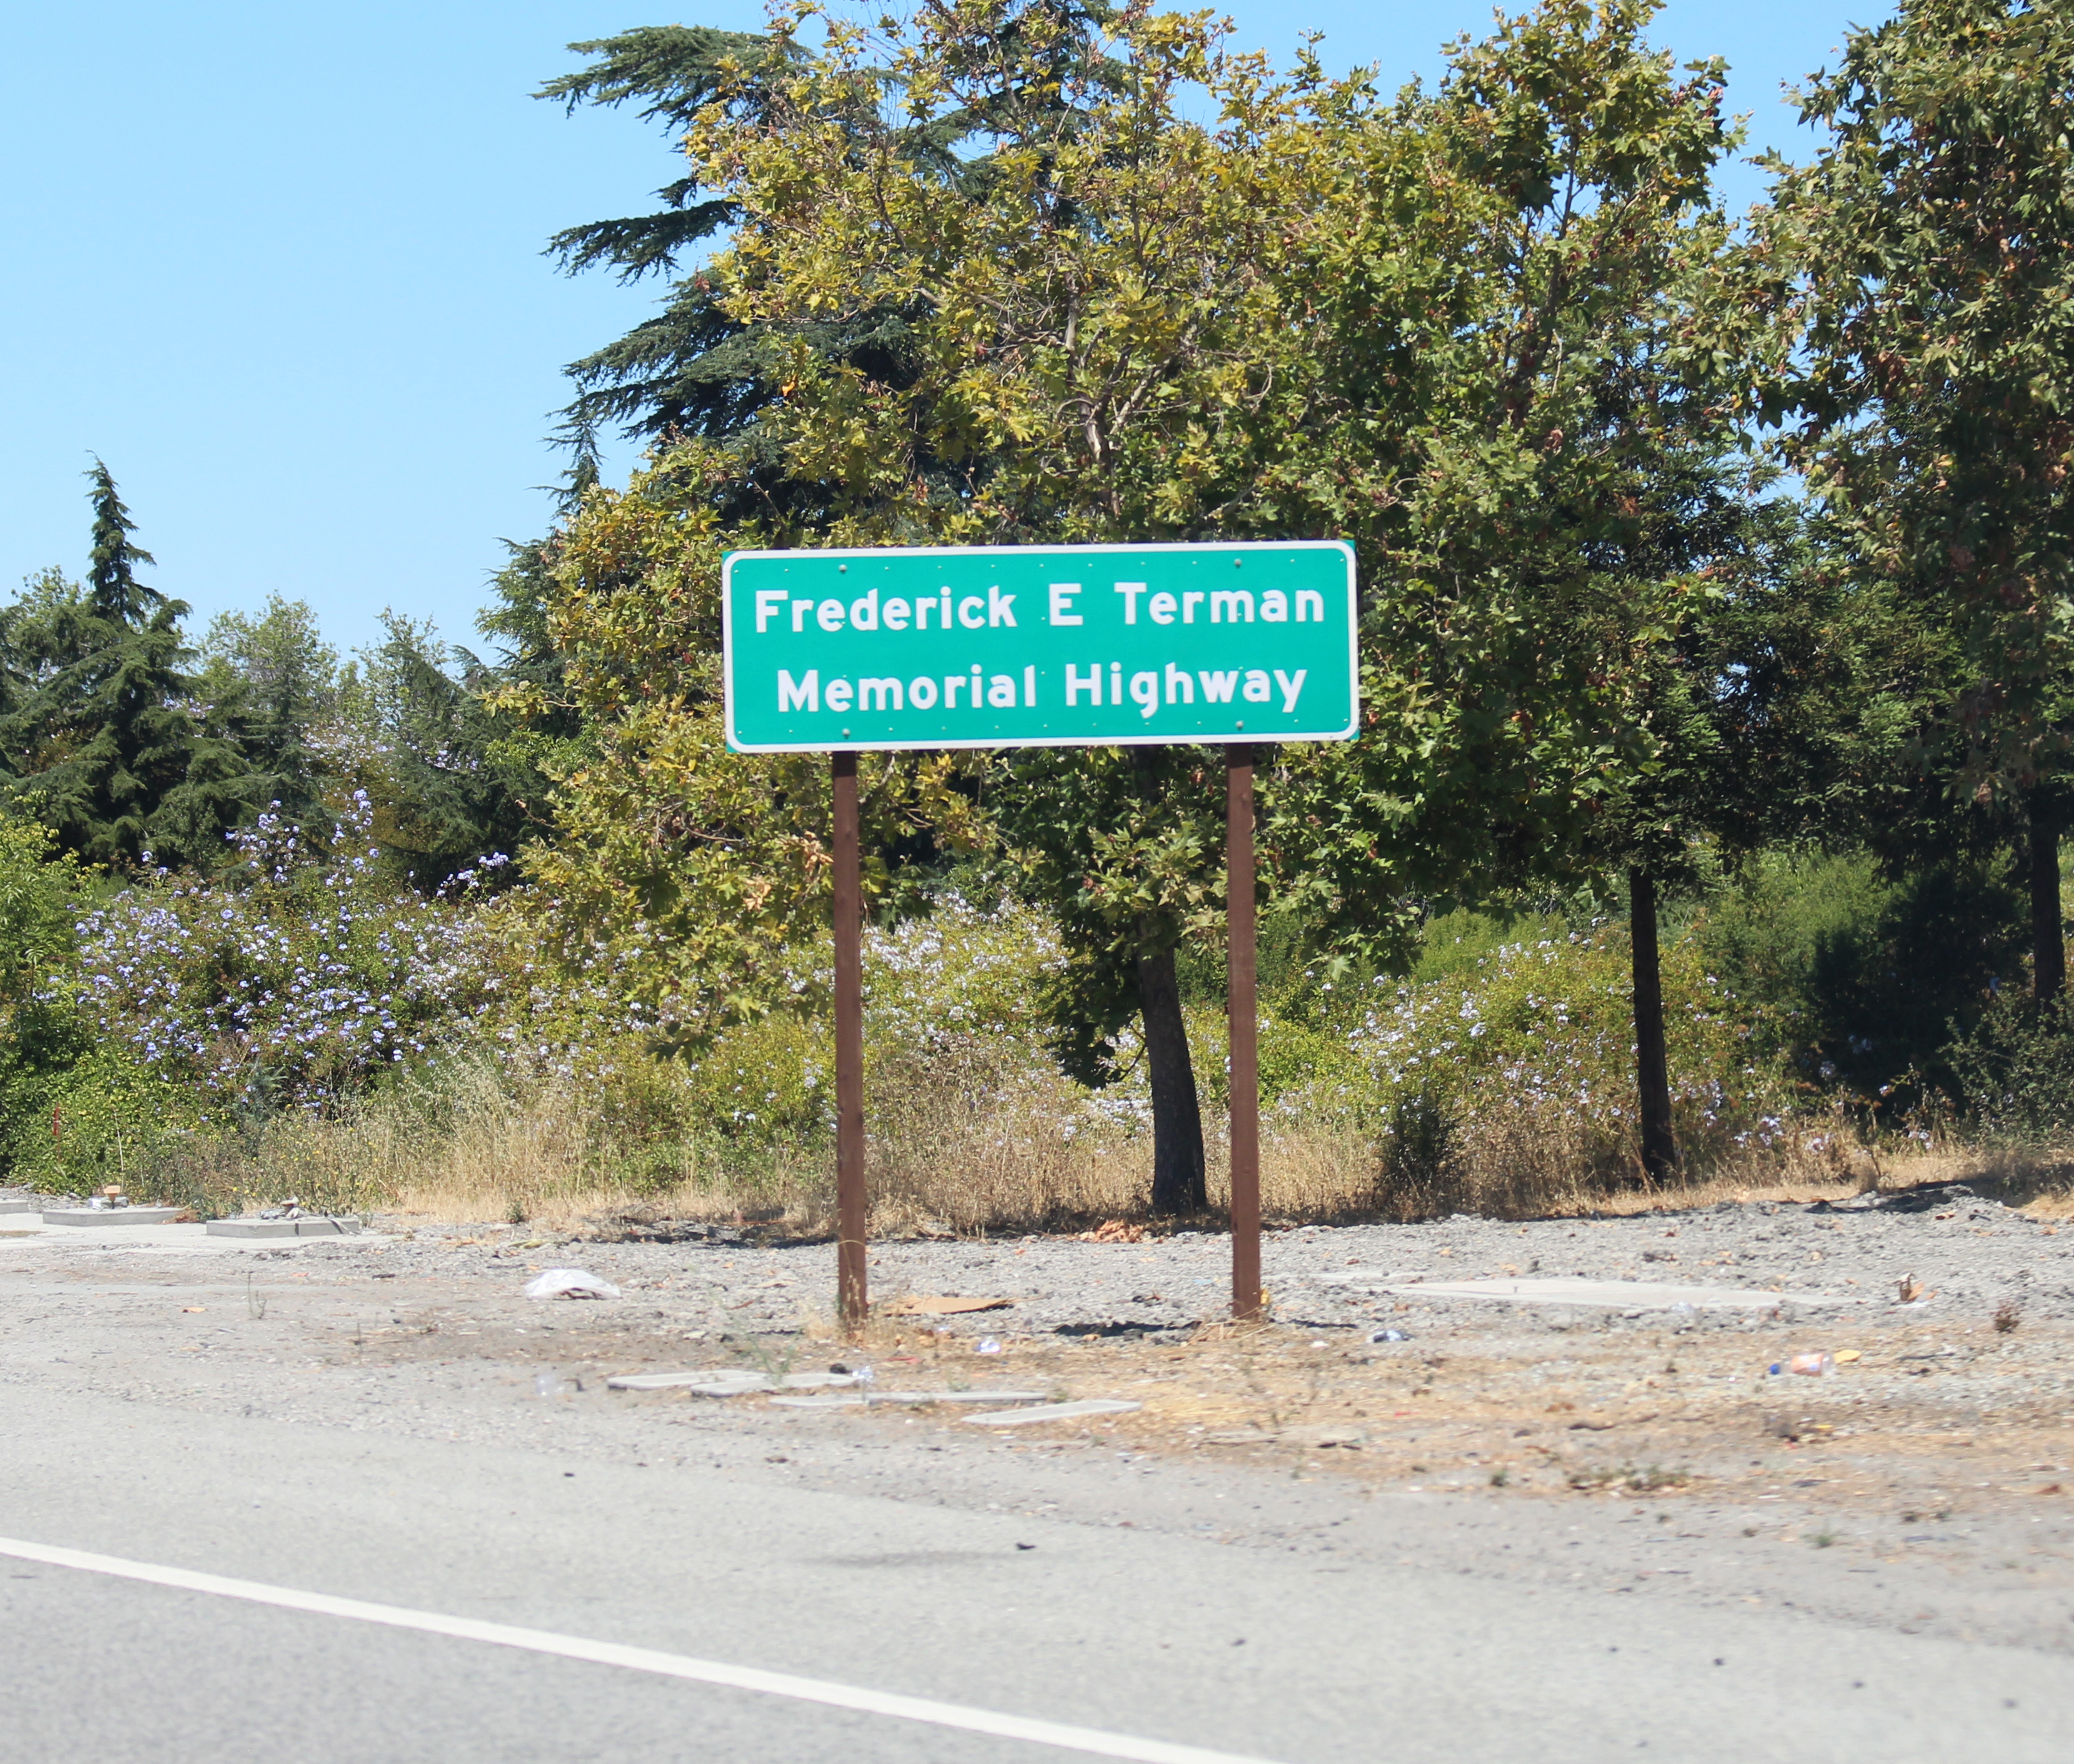 virtual Química Nombre provisional File:Frederick E. Terman Memorial Highway Sign.jpg - Wikimedia Commons